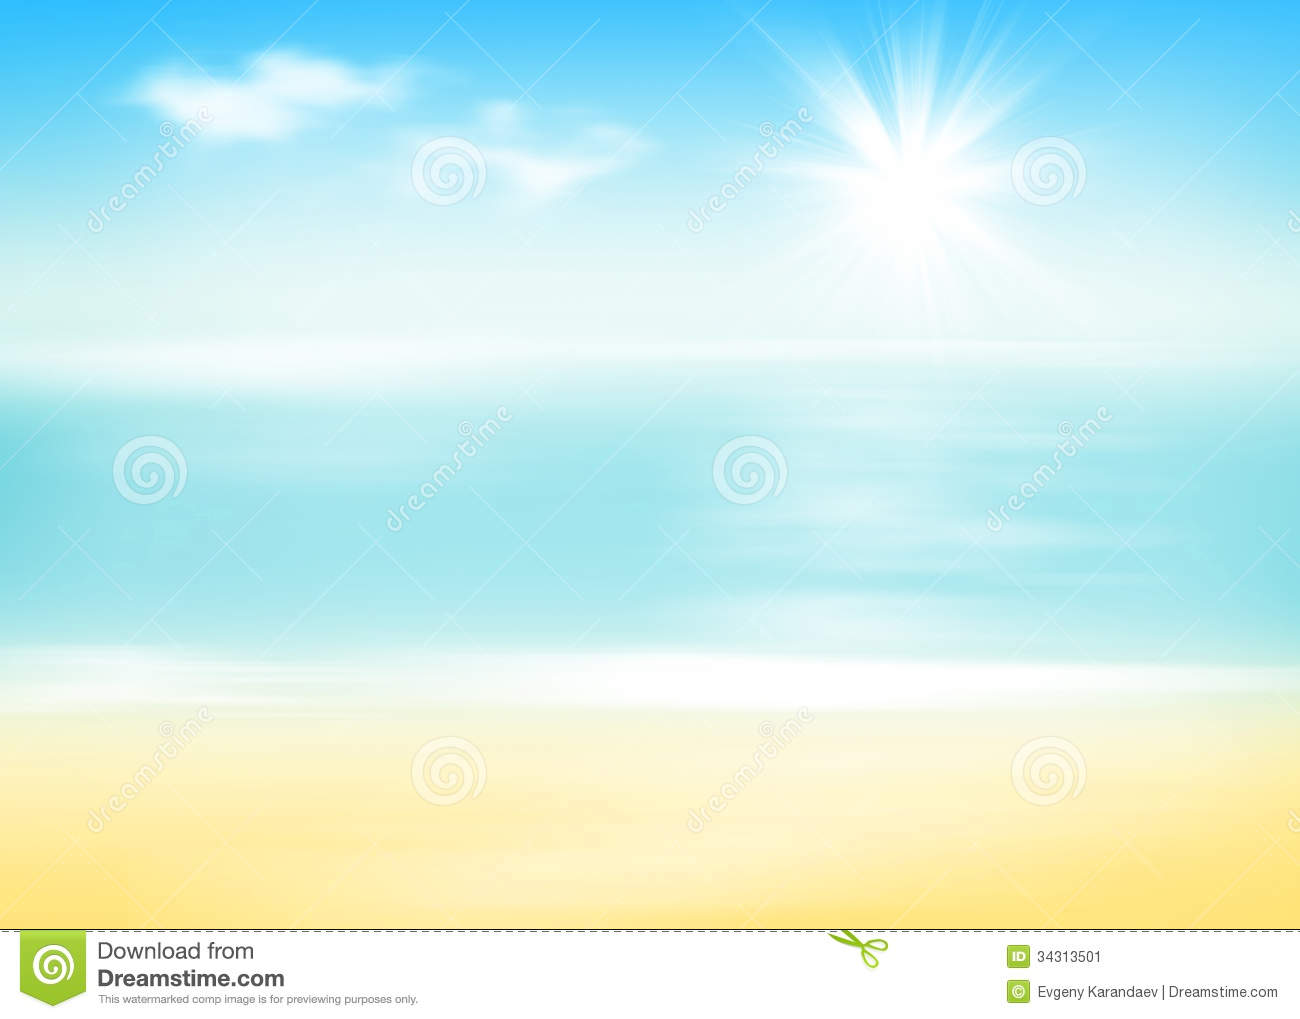 Beach And Sea With Sunny Sky Stock Image   Image  34313501